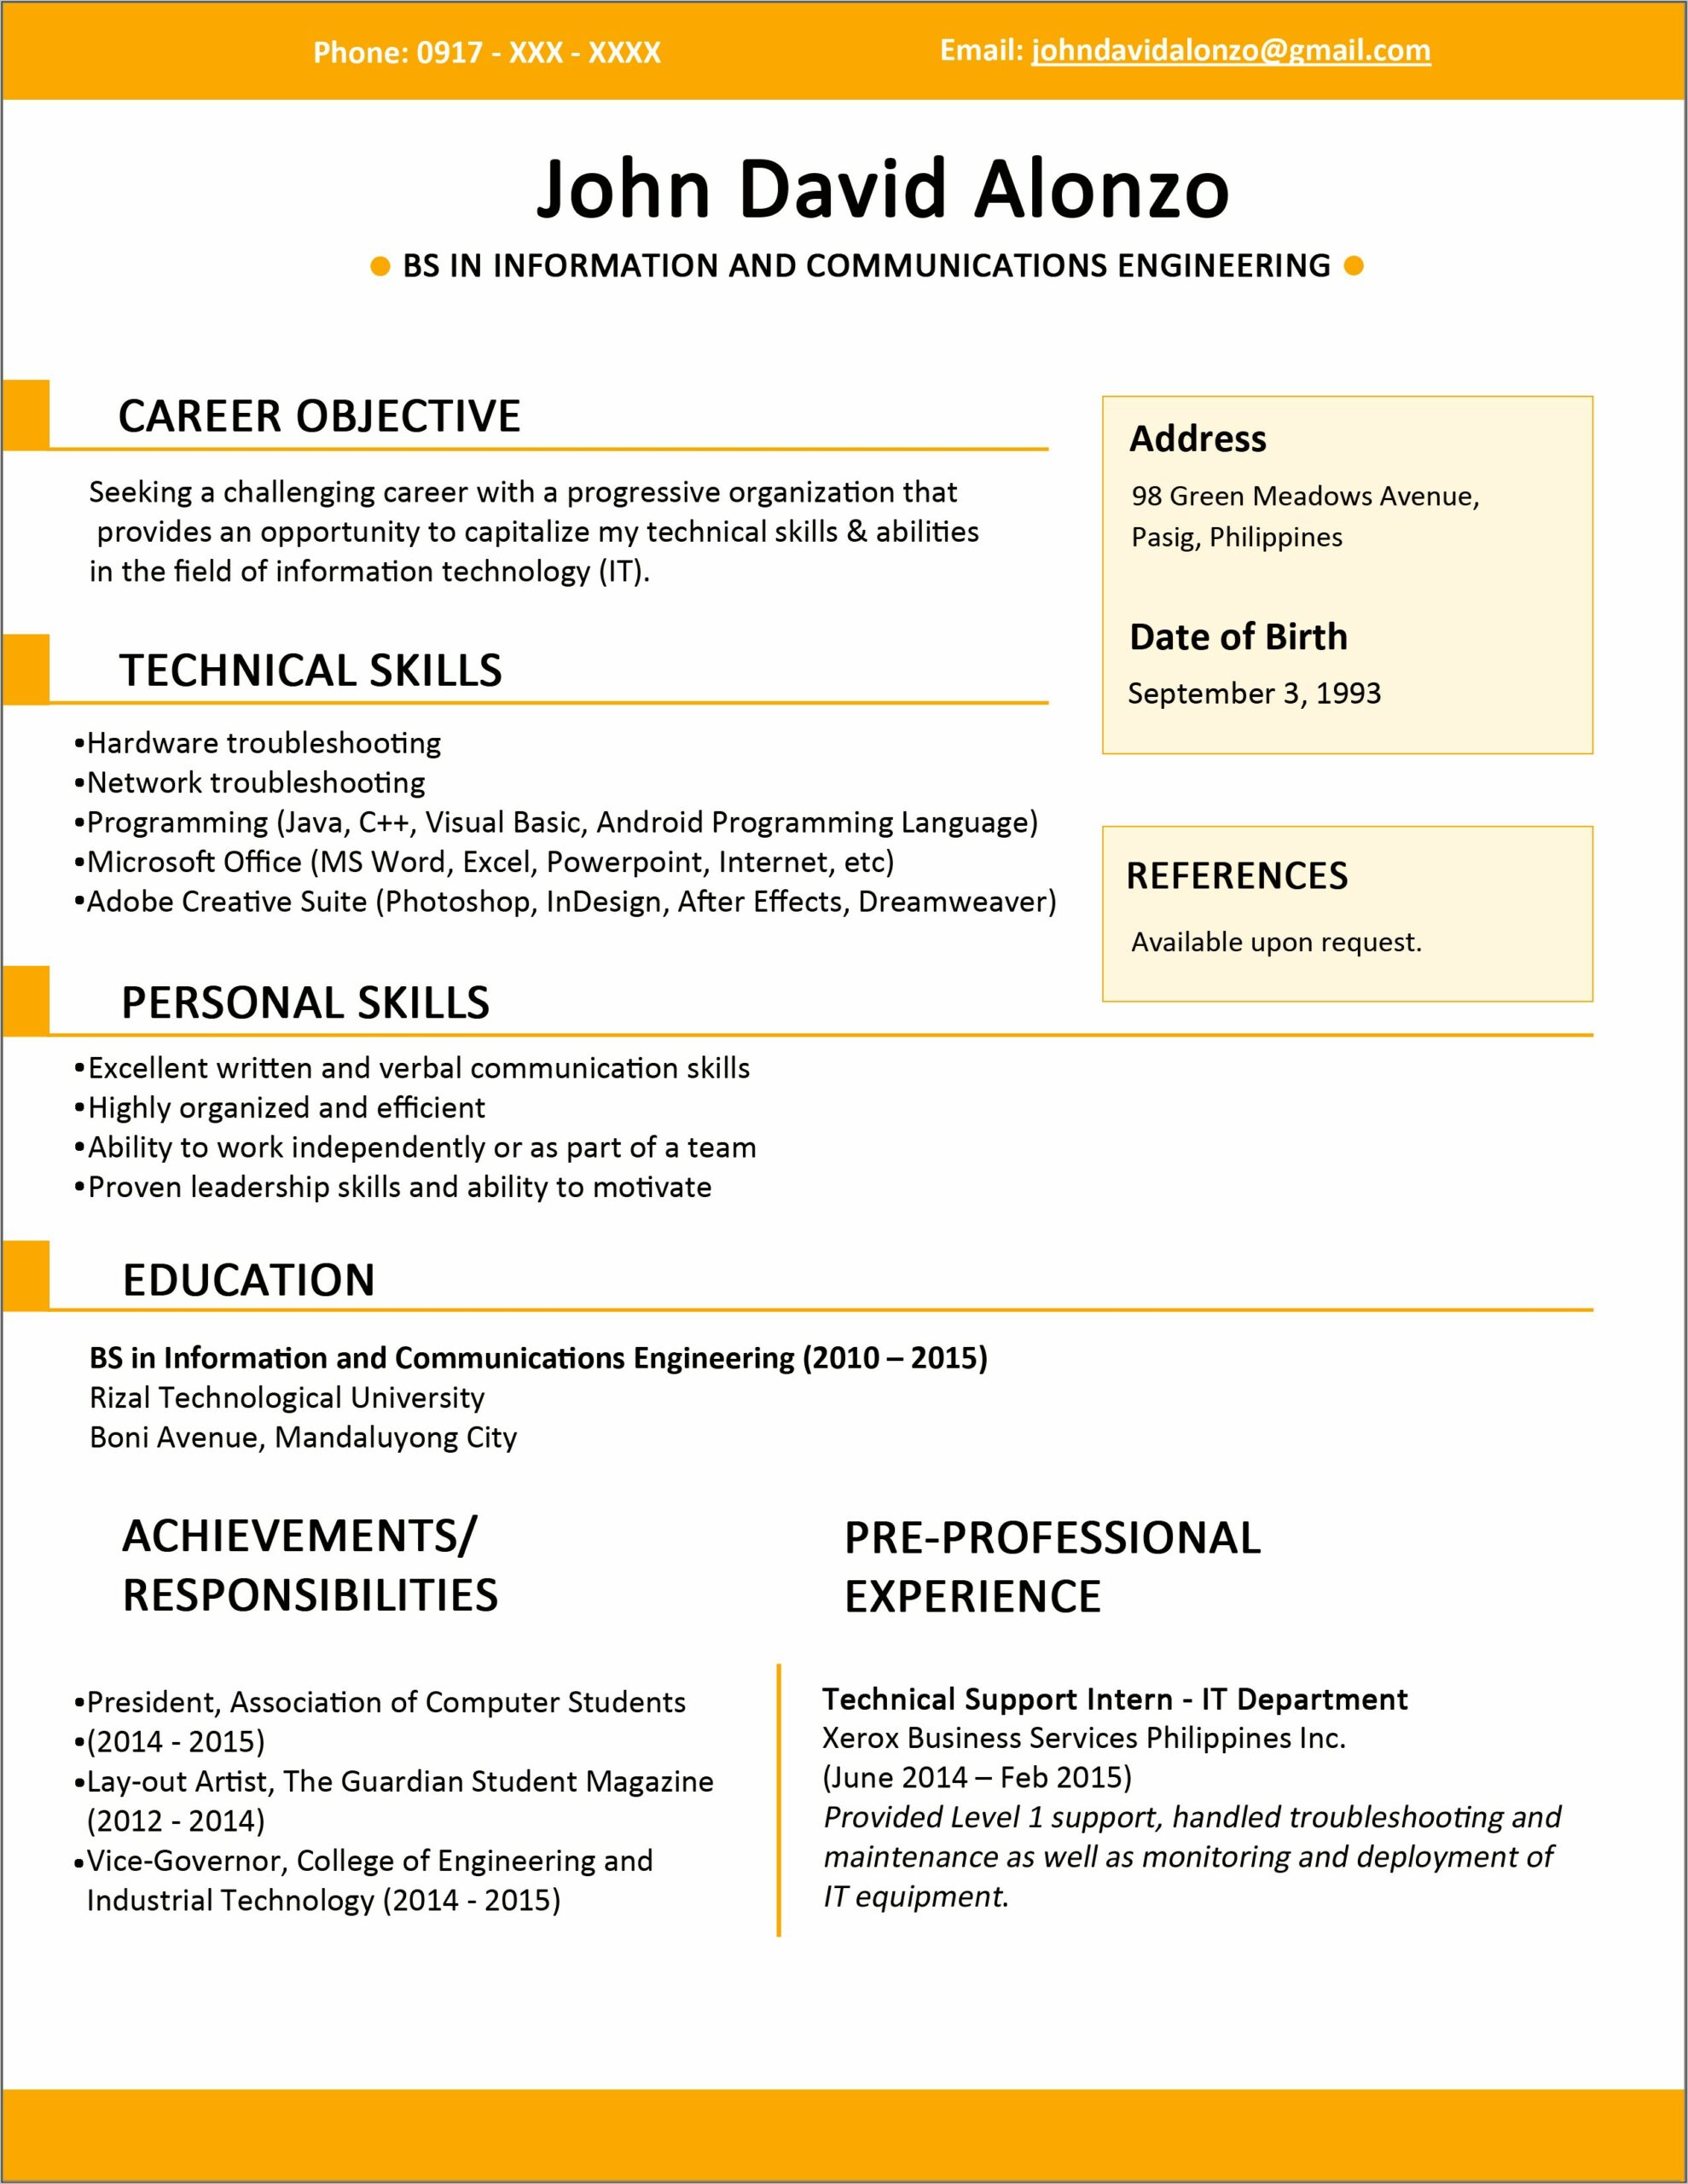 Resume To Apply To Jobs Examples